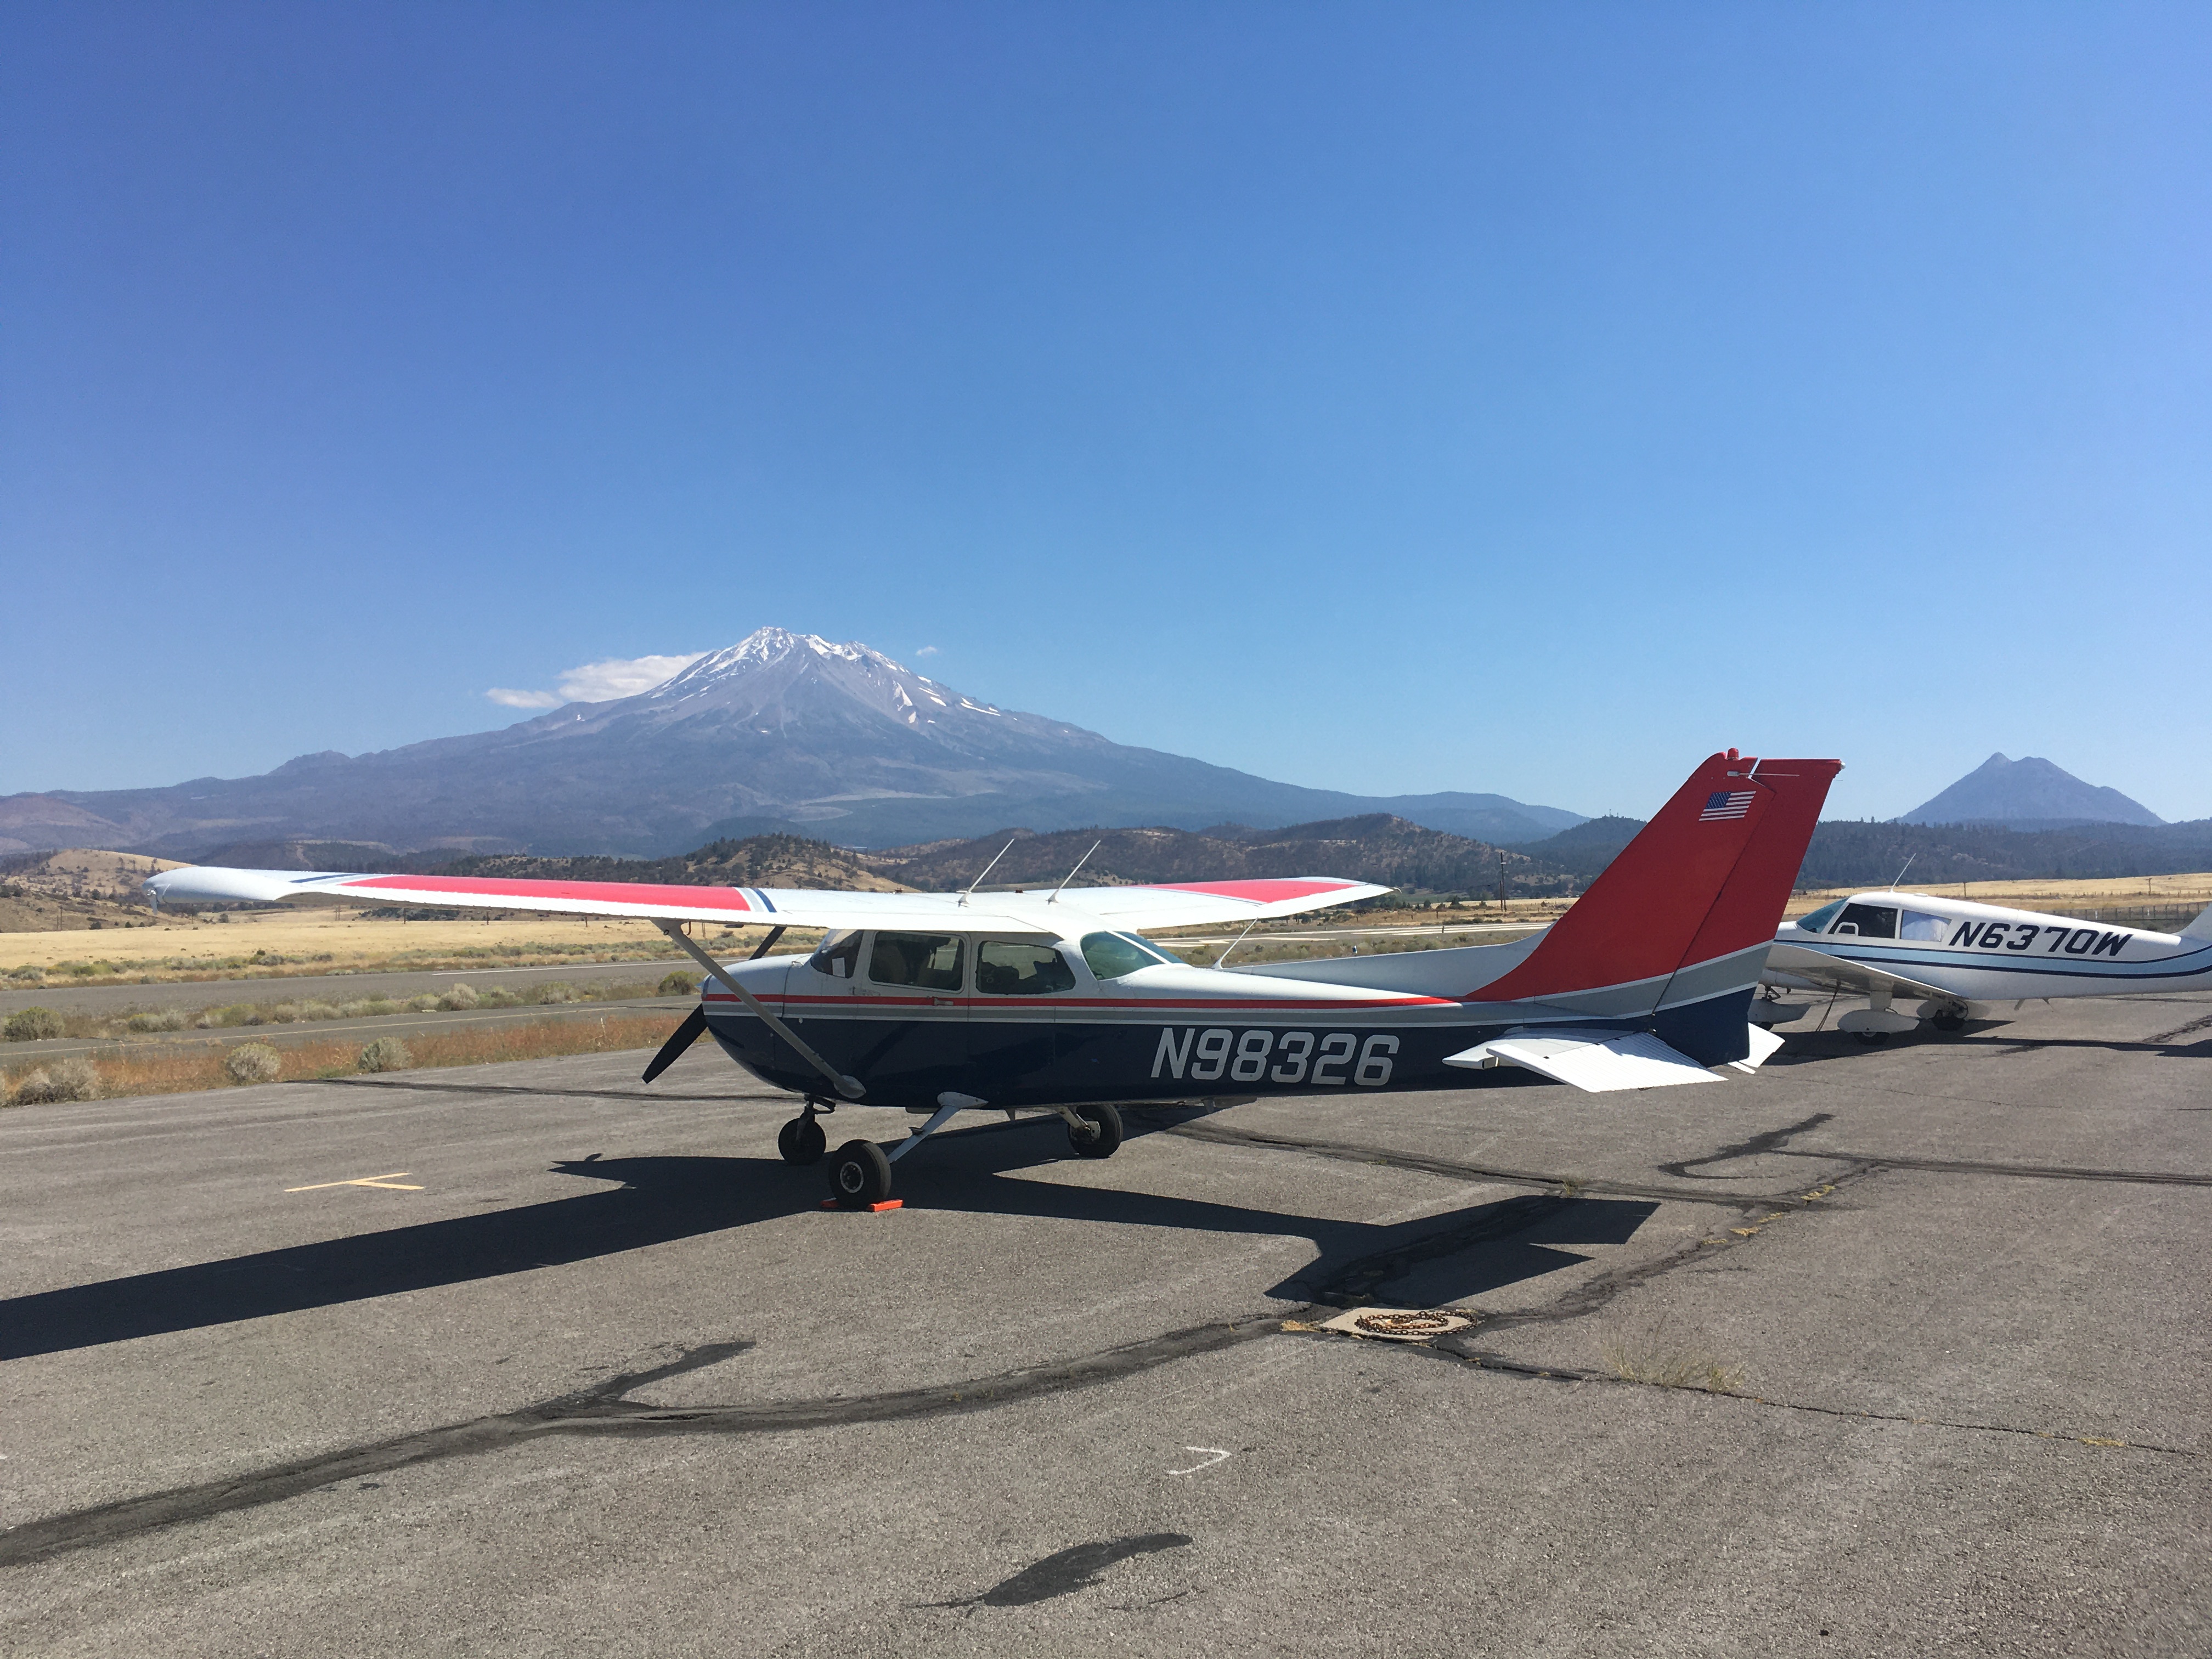 N98326 in the foreground, Mt Shasta in the distance